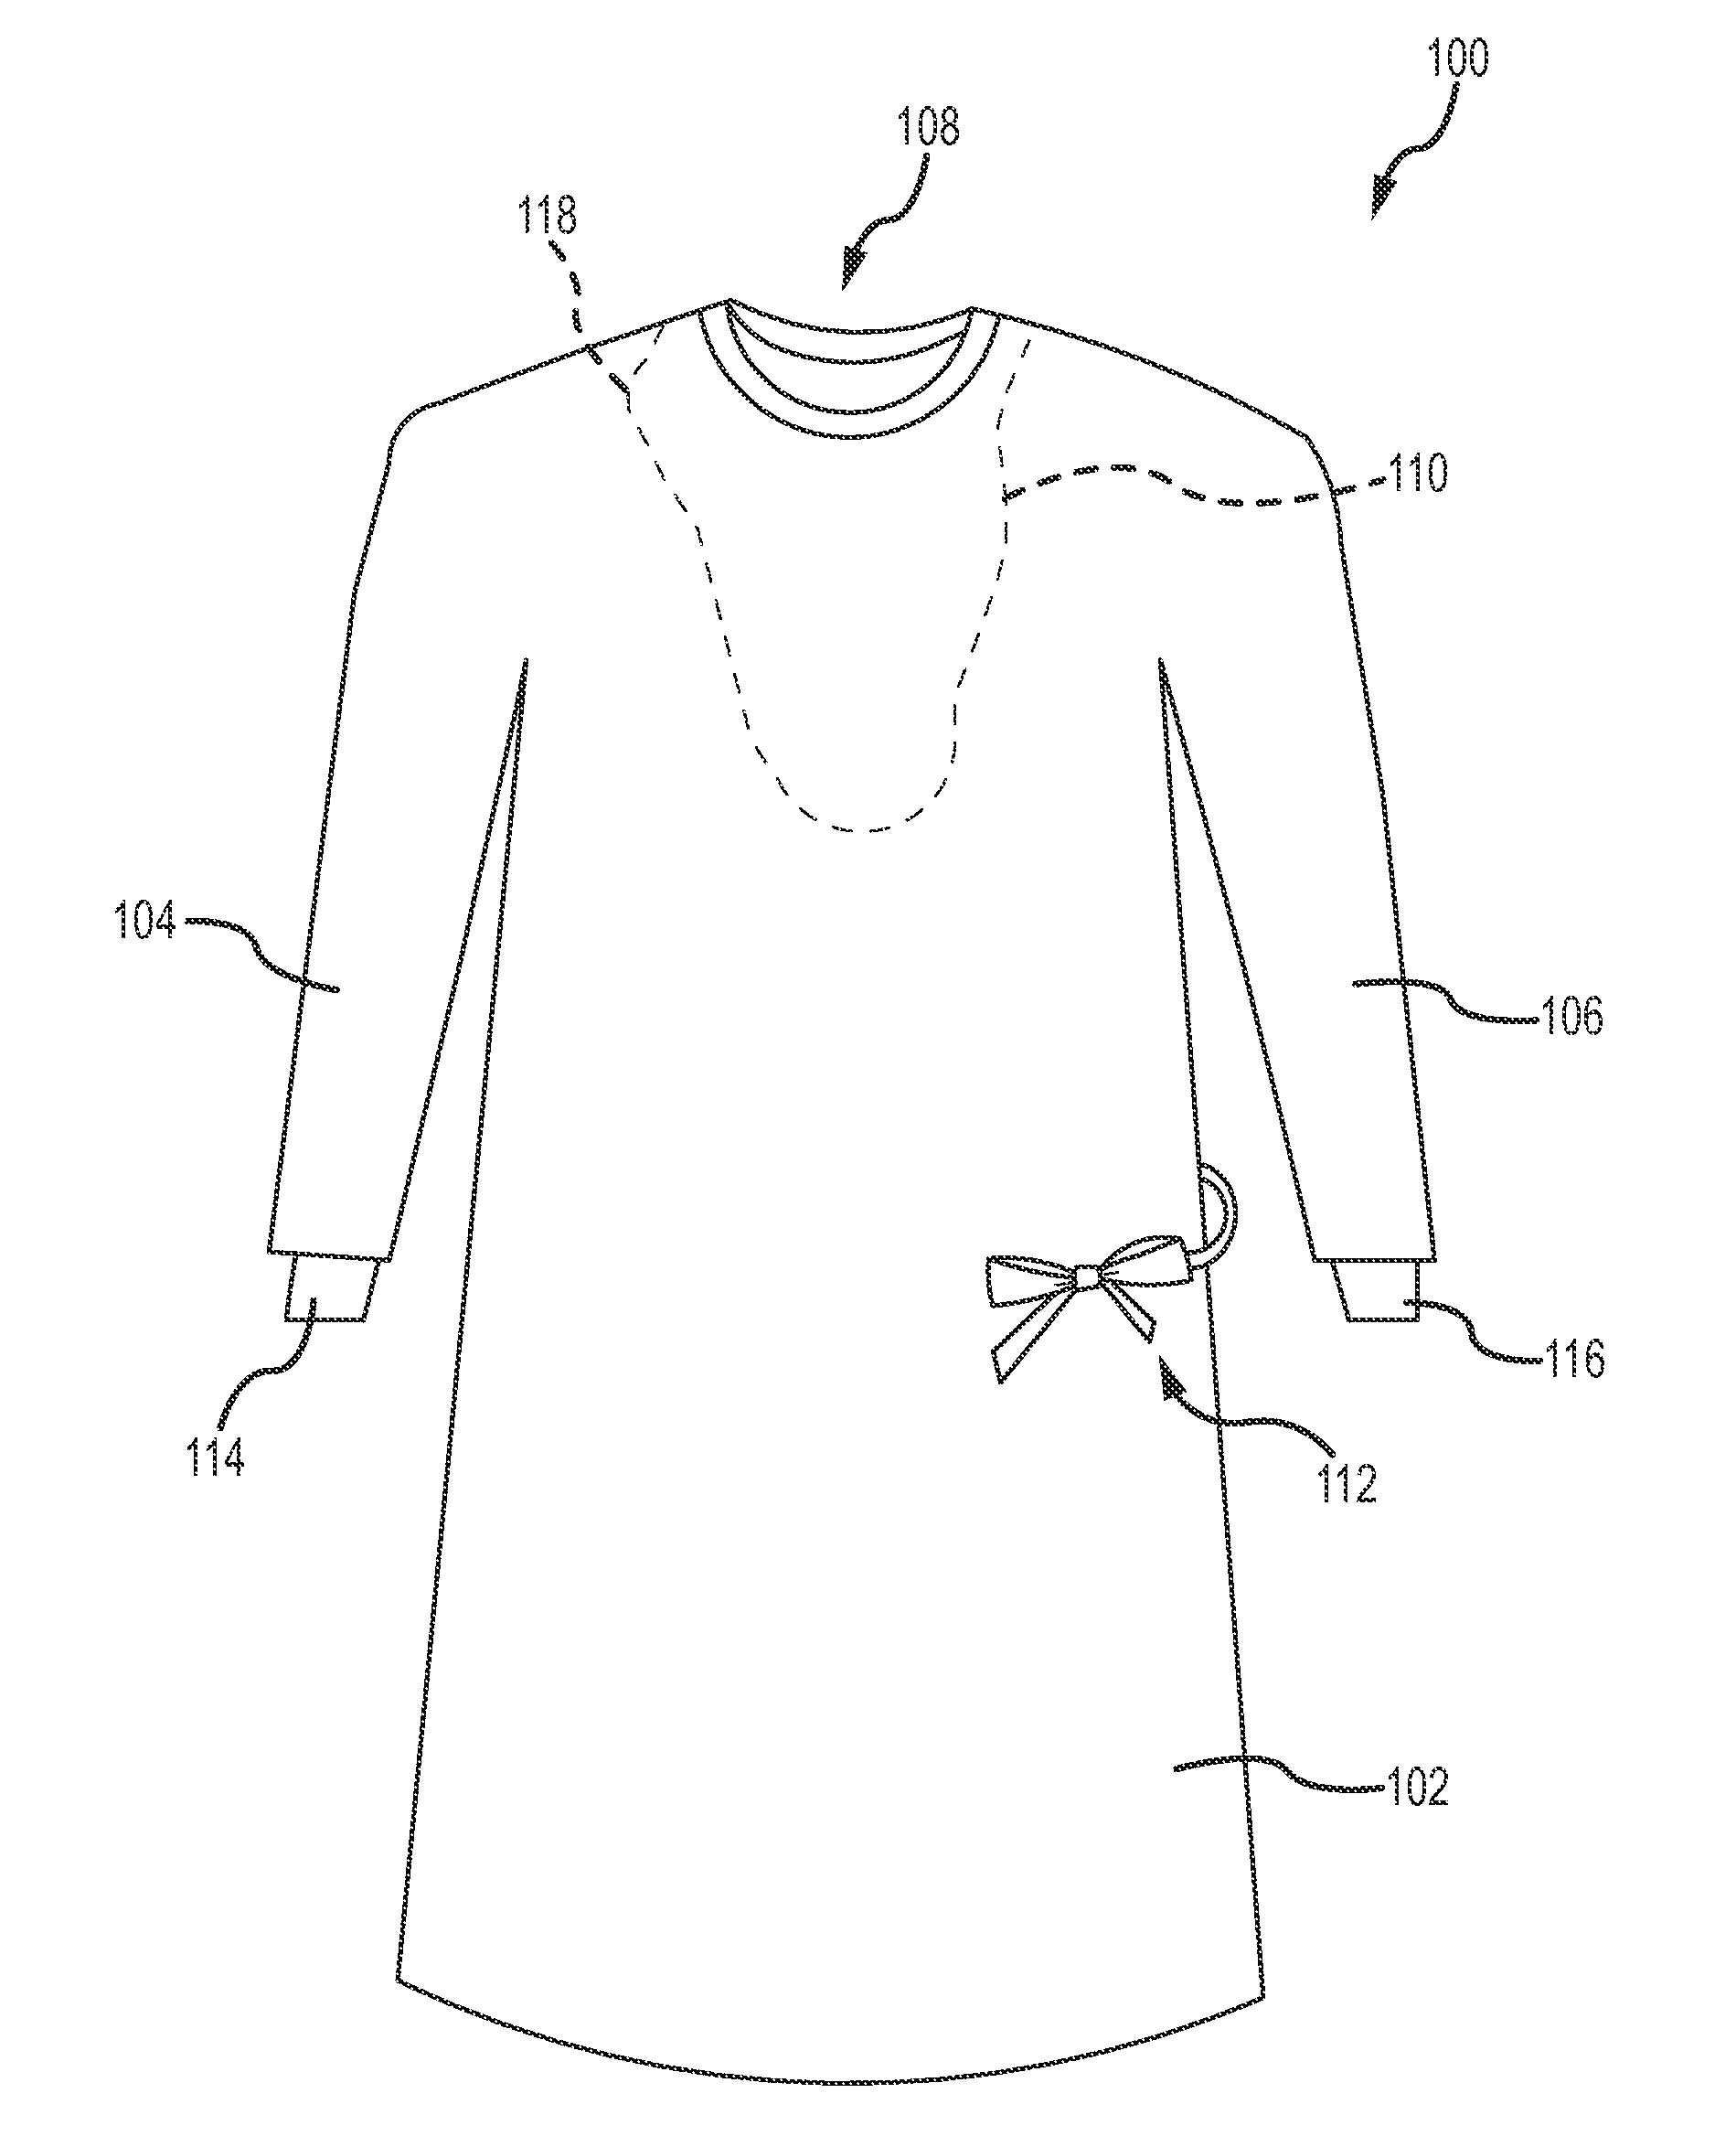 Self-donning surgical gown